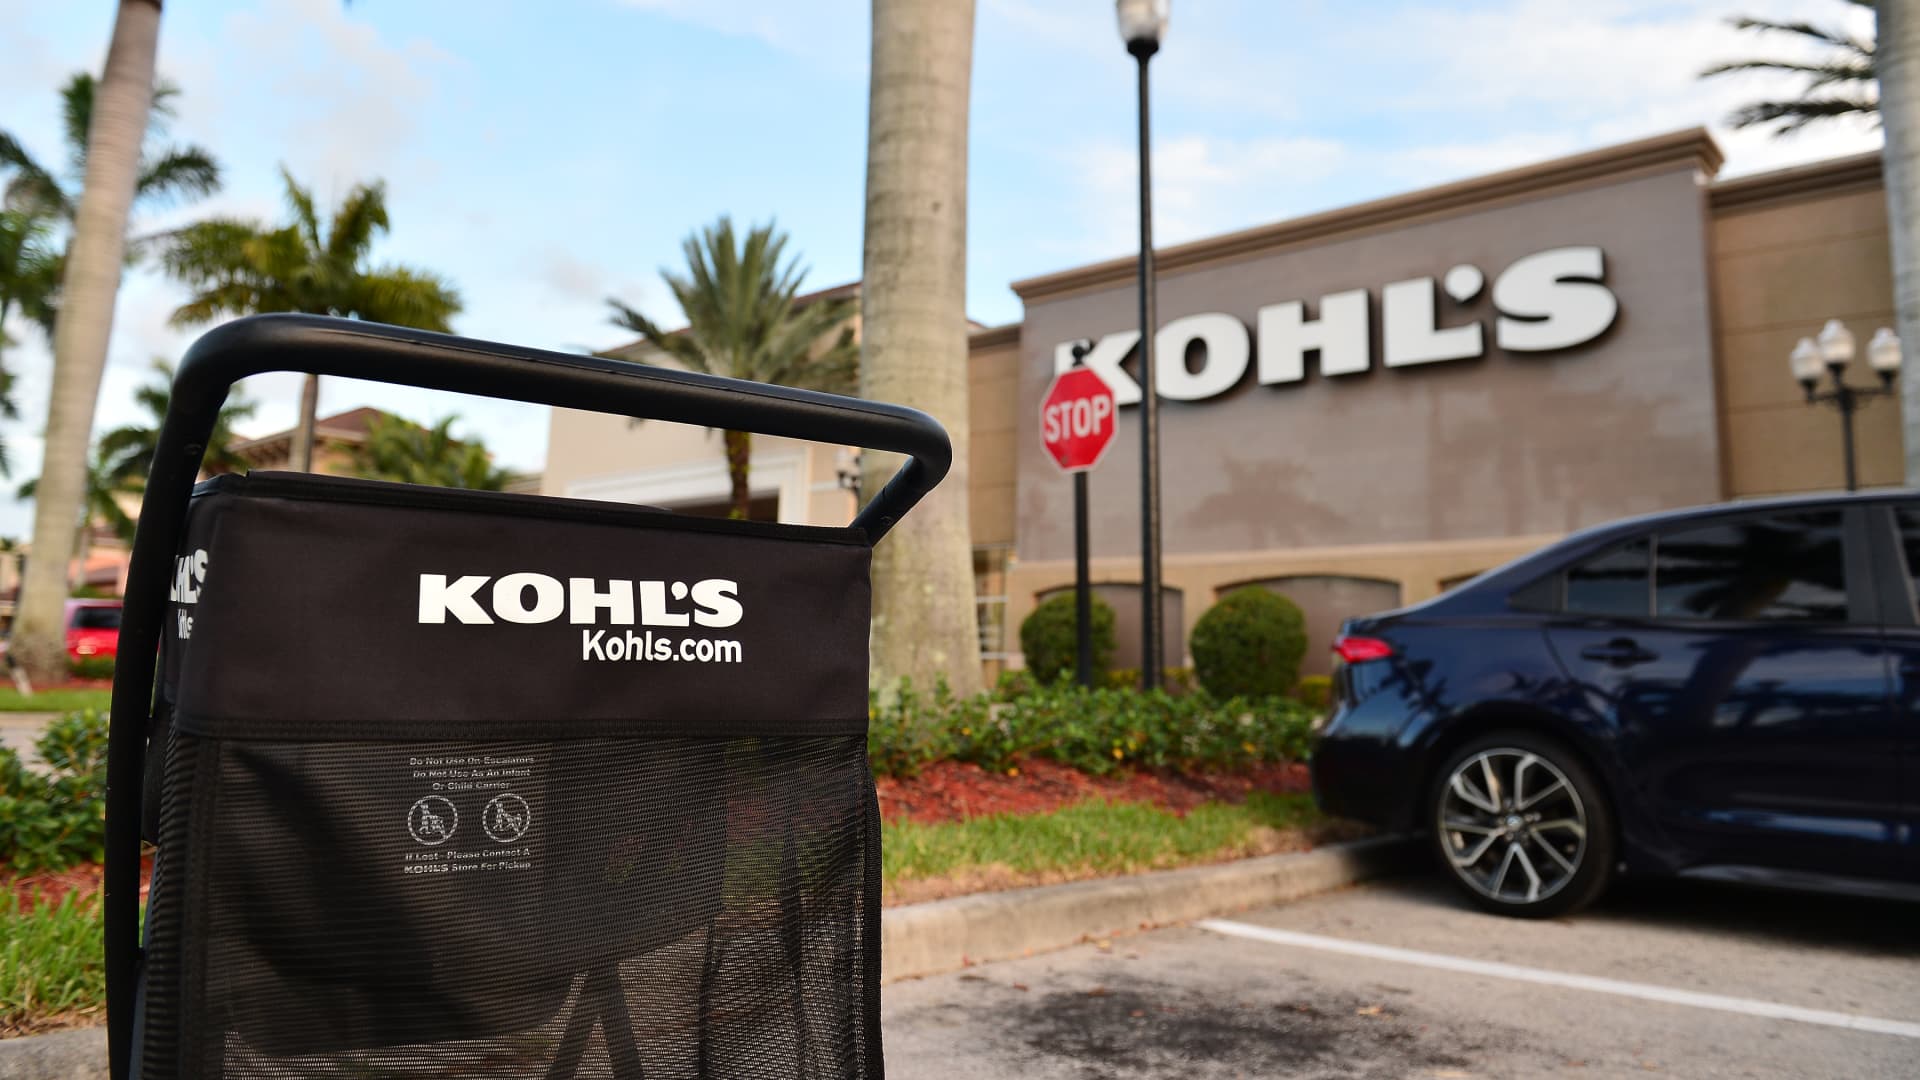 A view outside a Kohl's store in Miramar, Florida.